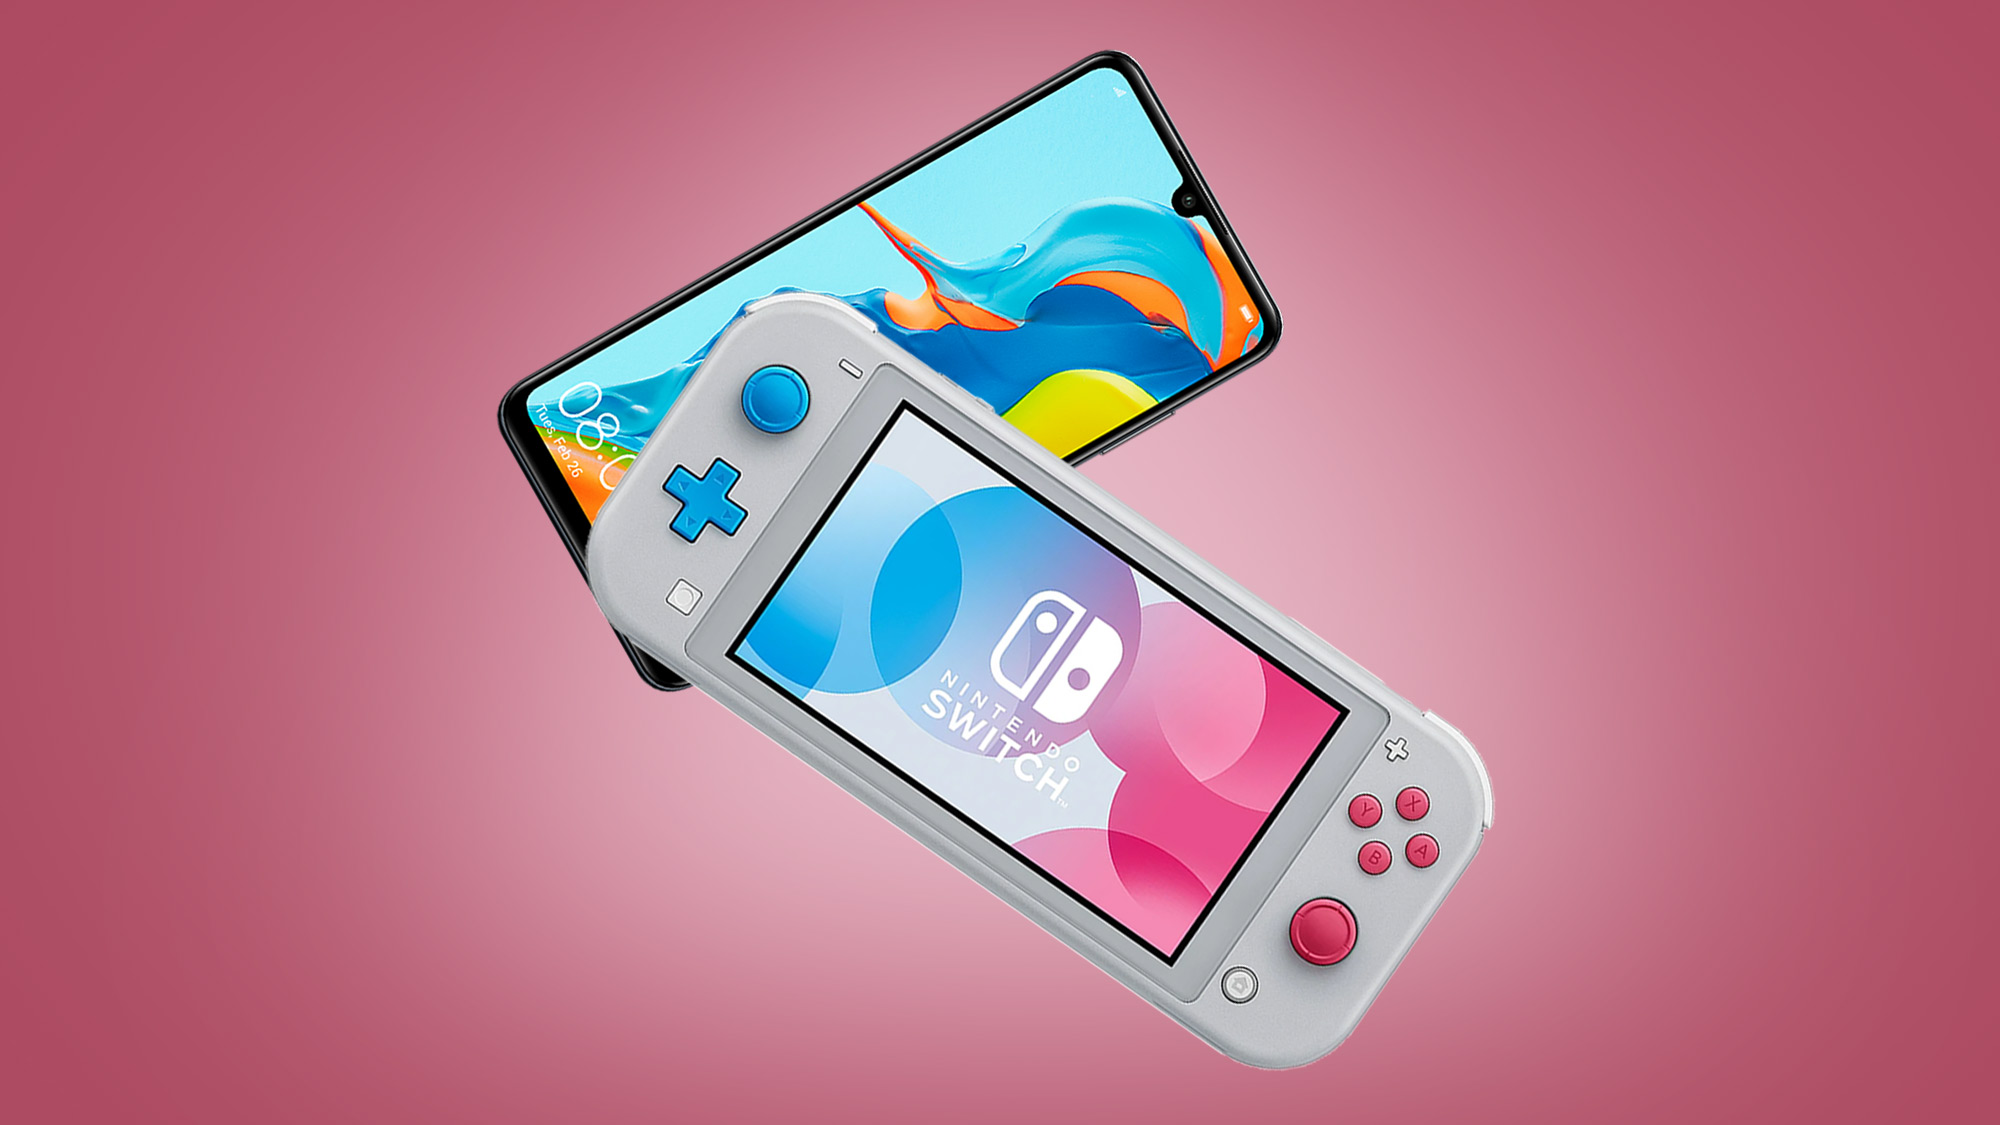 nintendo switch free with phone contract